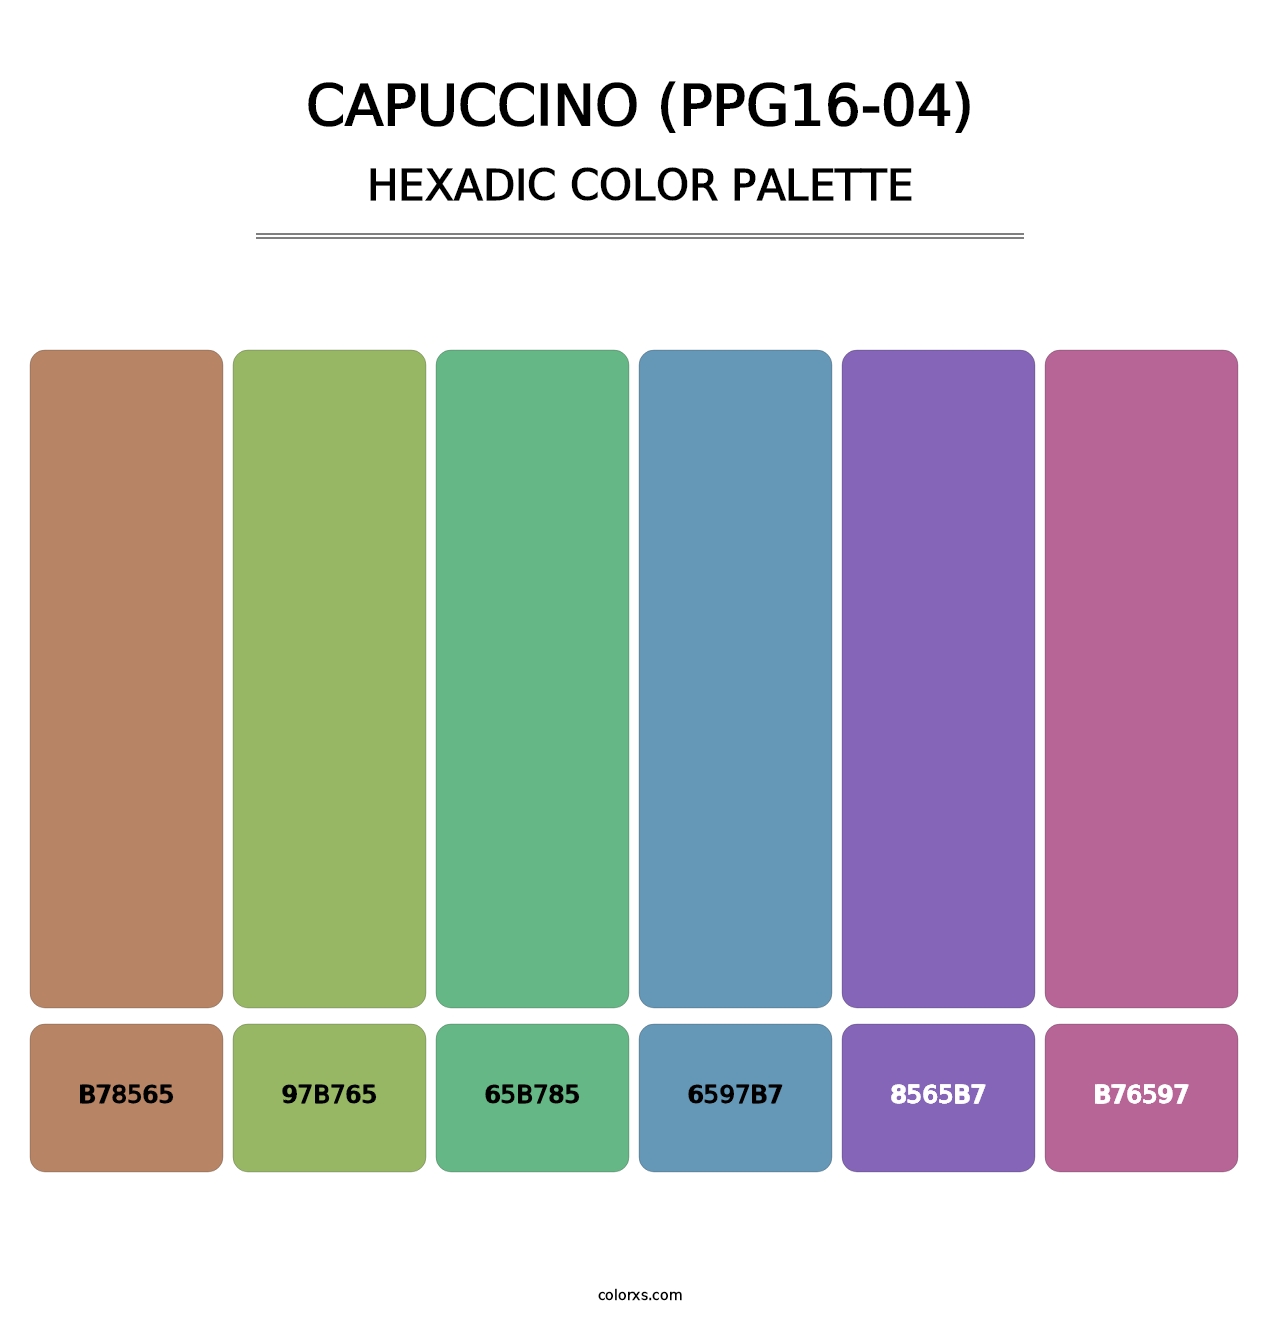 Capuccino (PPG16-04) - Hexadic Color Palette